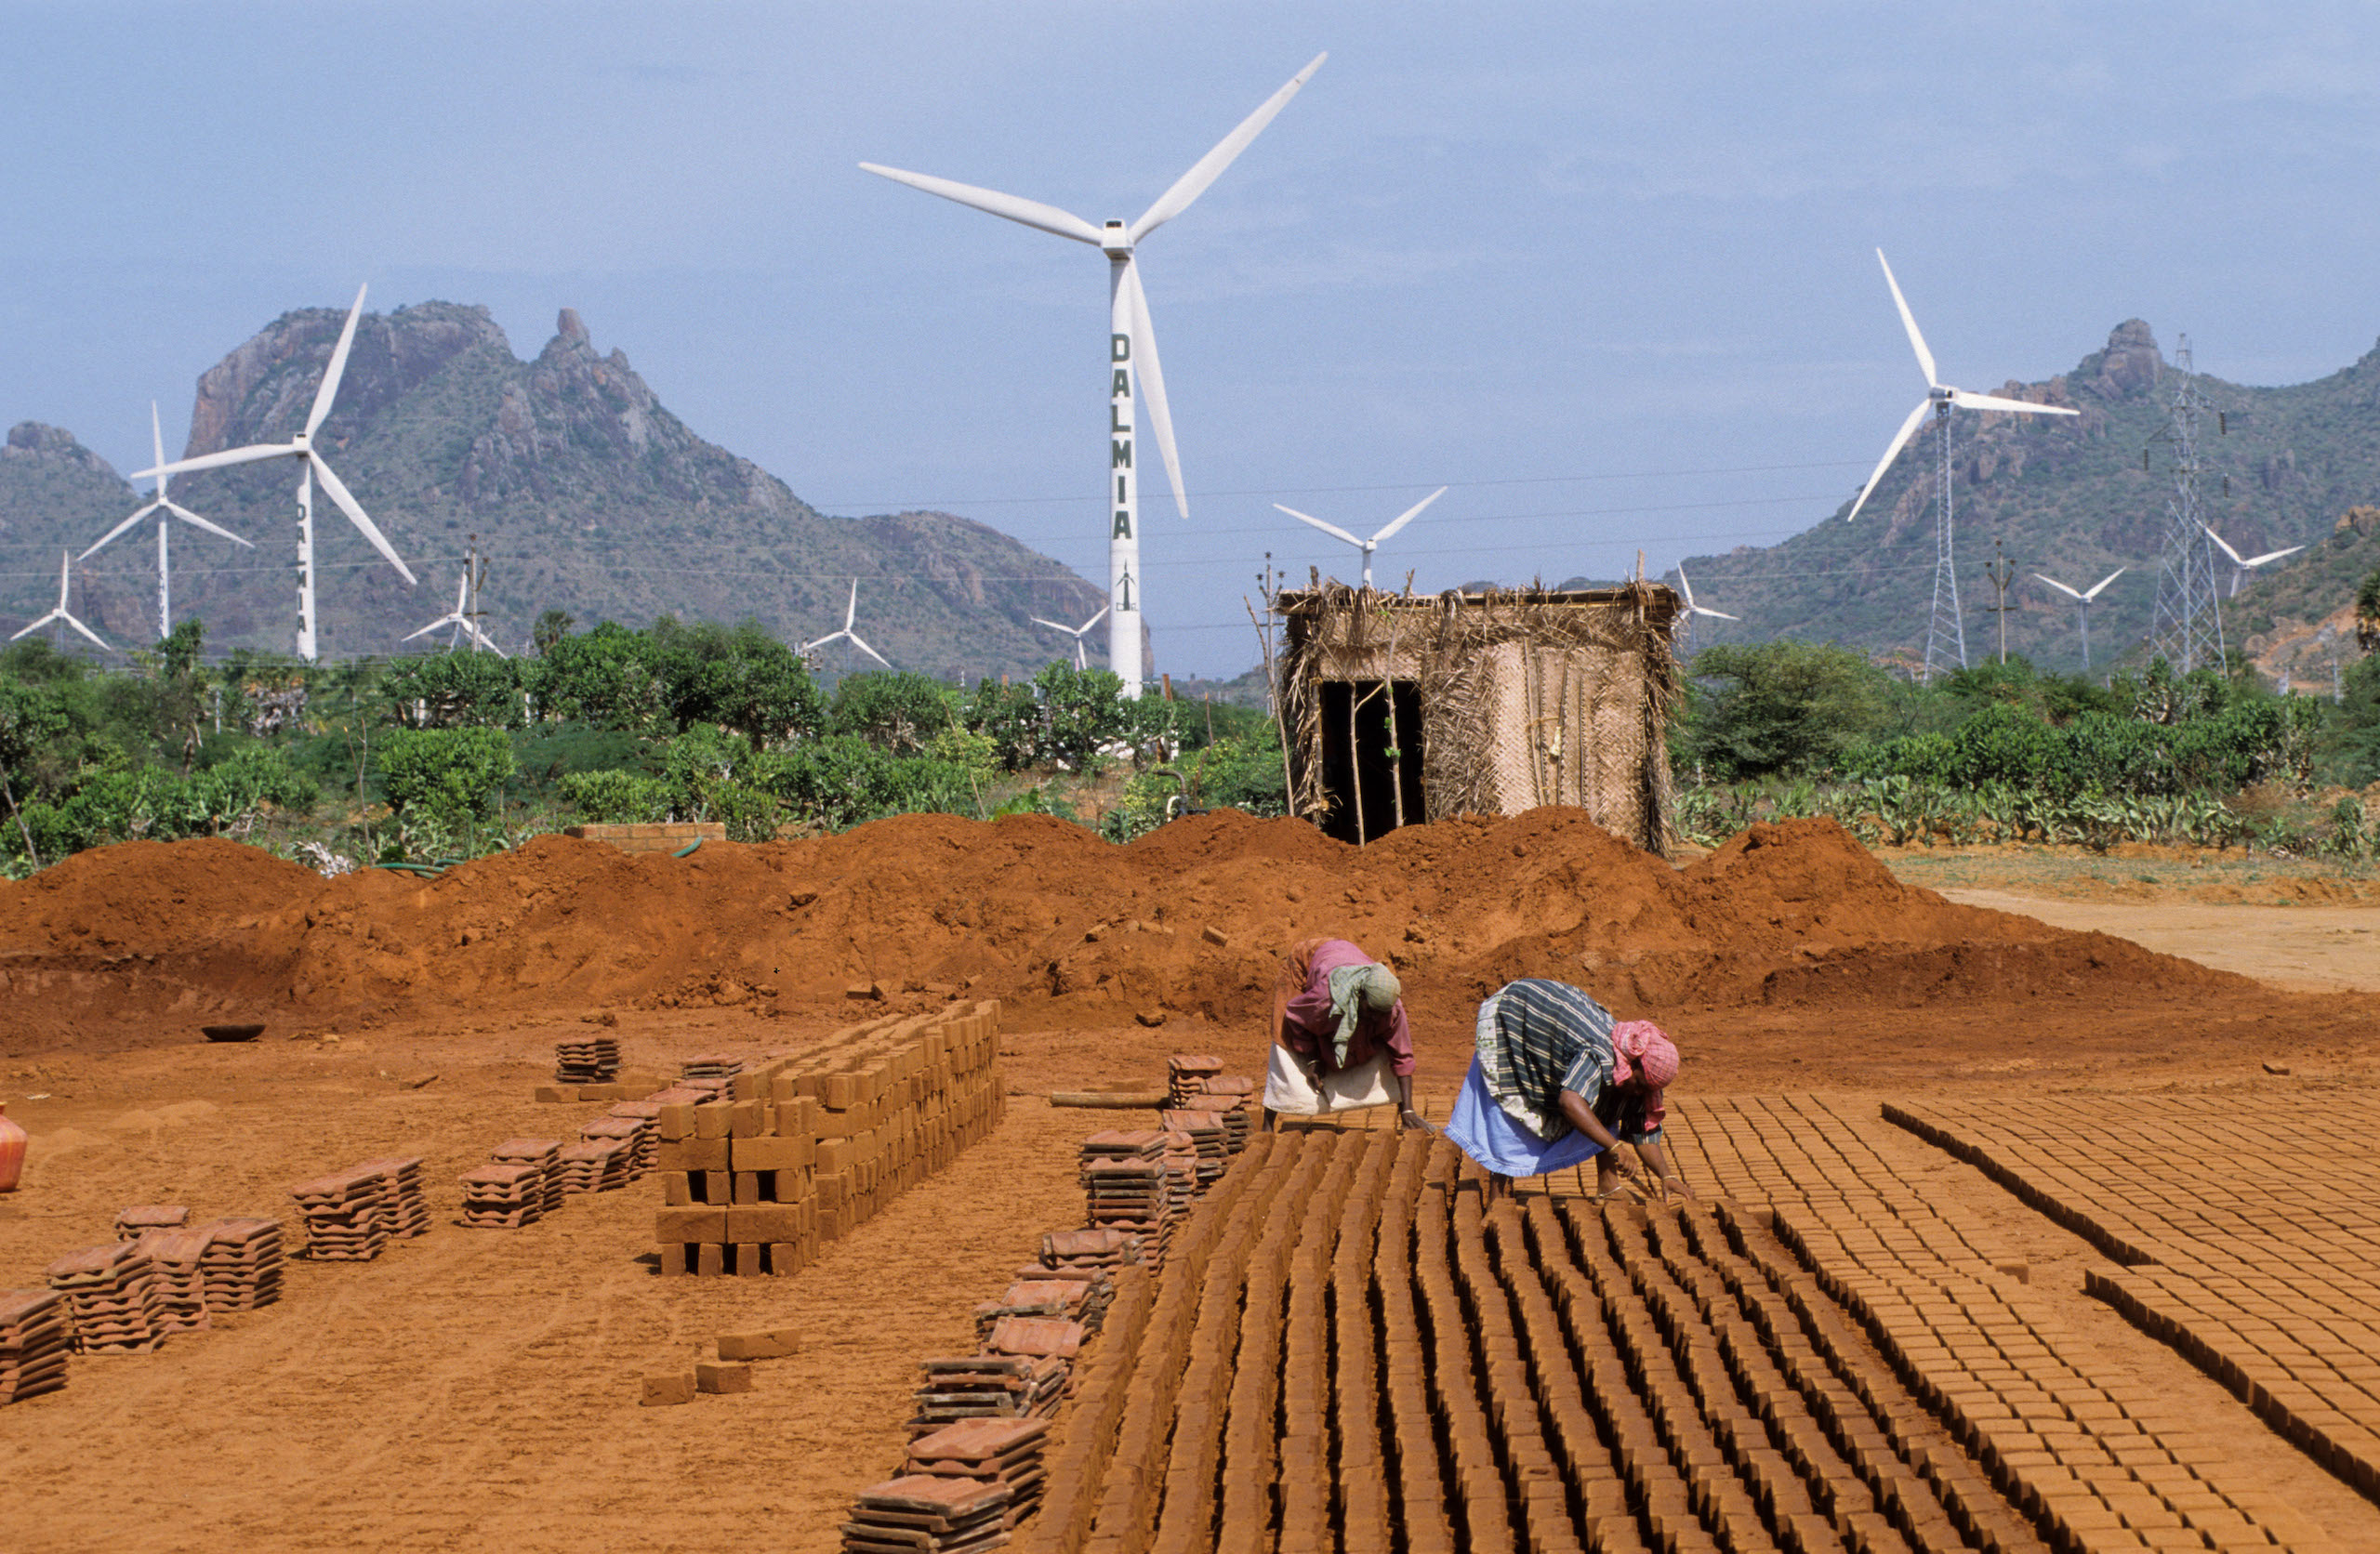 <p>Huge investment in renewable energy is essential if India is to meet its decarbonisation targets. But analysis of investment announcements indicates support for fossil fuels is continuing. (Image: Joerg Boethling / Alamy)</p>